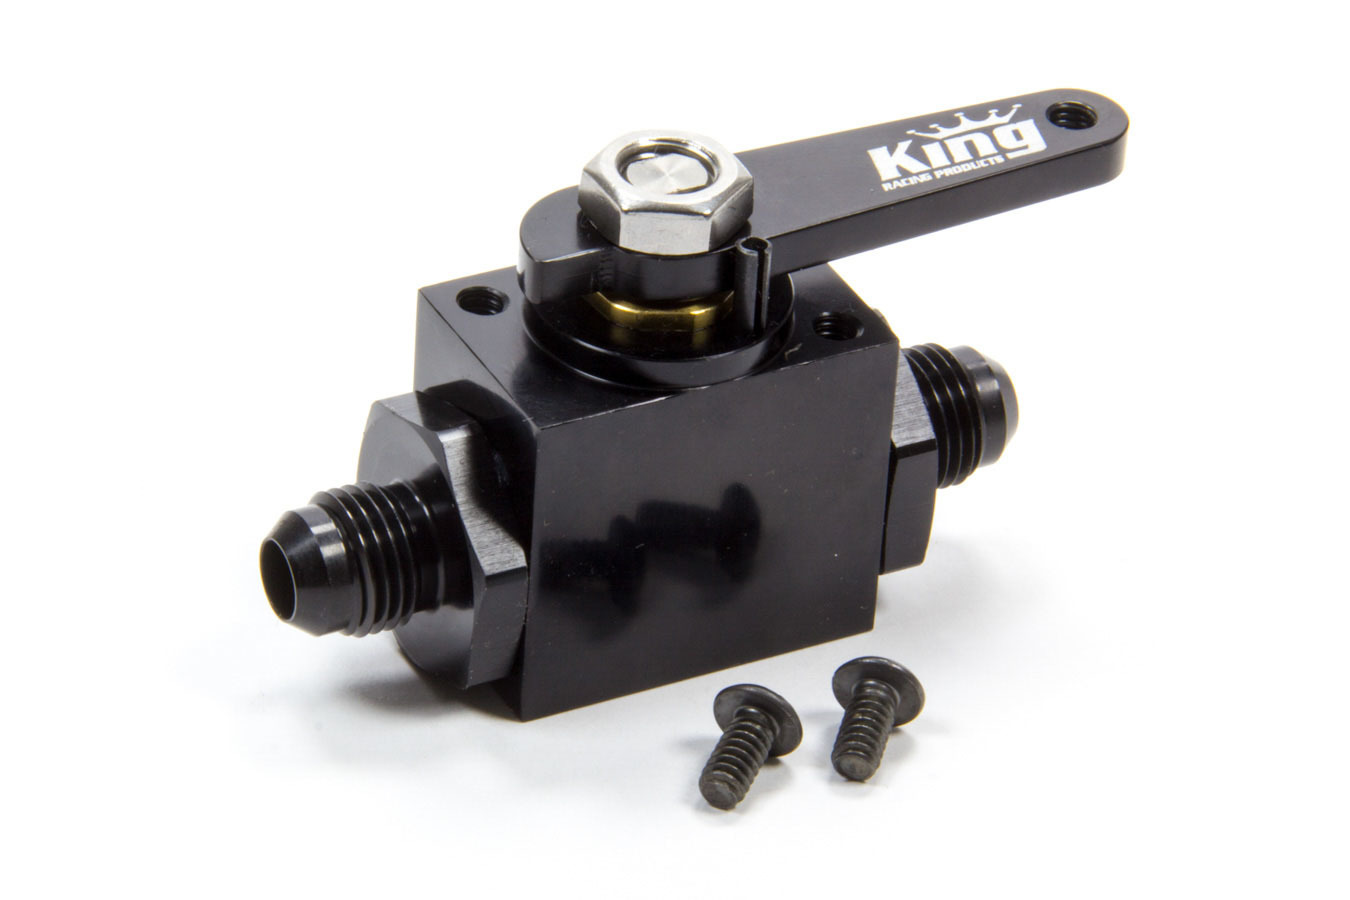 King Racing Products 4500 Shutoff Valve, Fuel Shutoff, In-Line, 6 AN Male Inlet, 6 AN Male Outlet, Aluminum, Black Anodized, Each